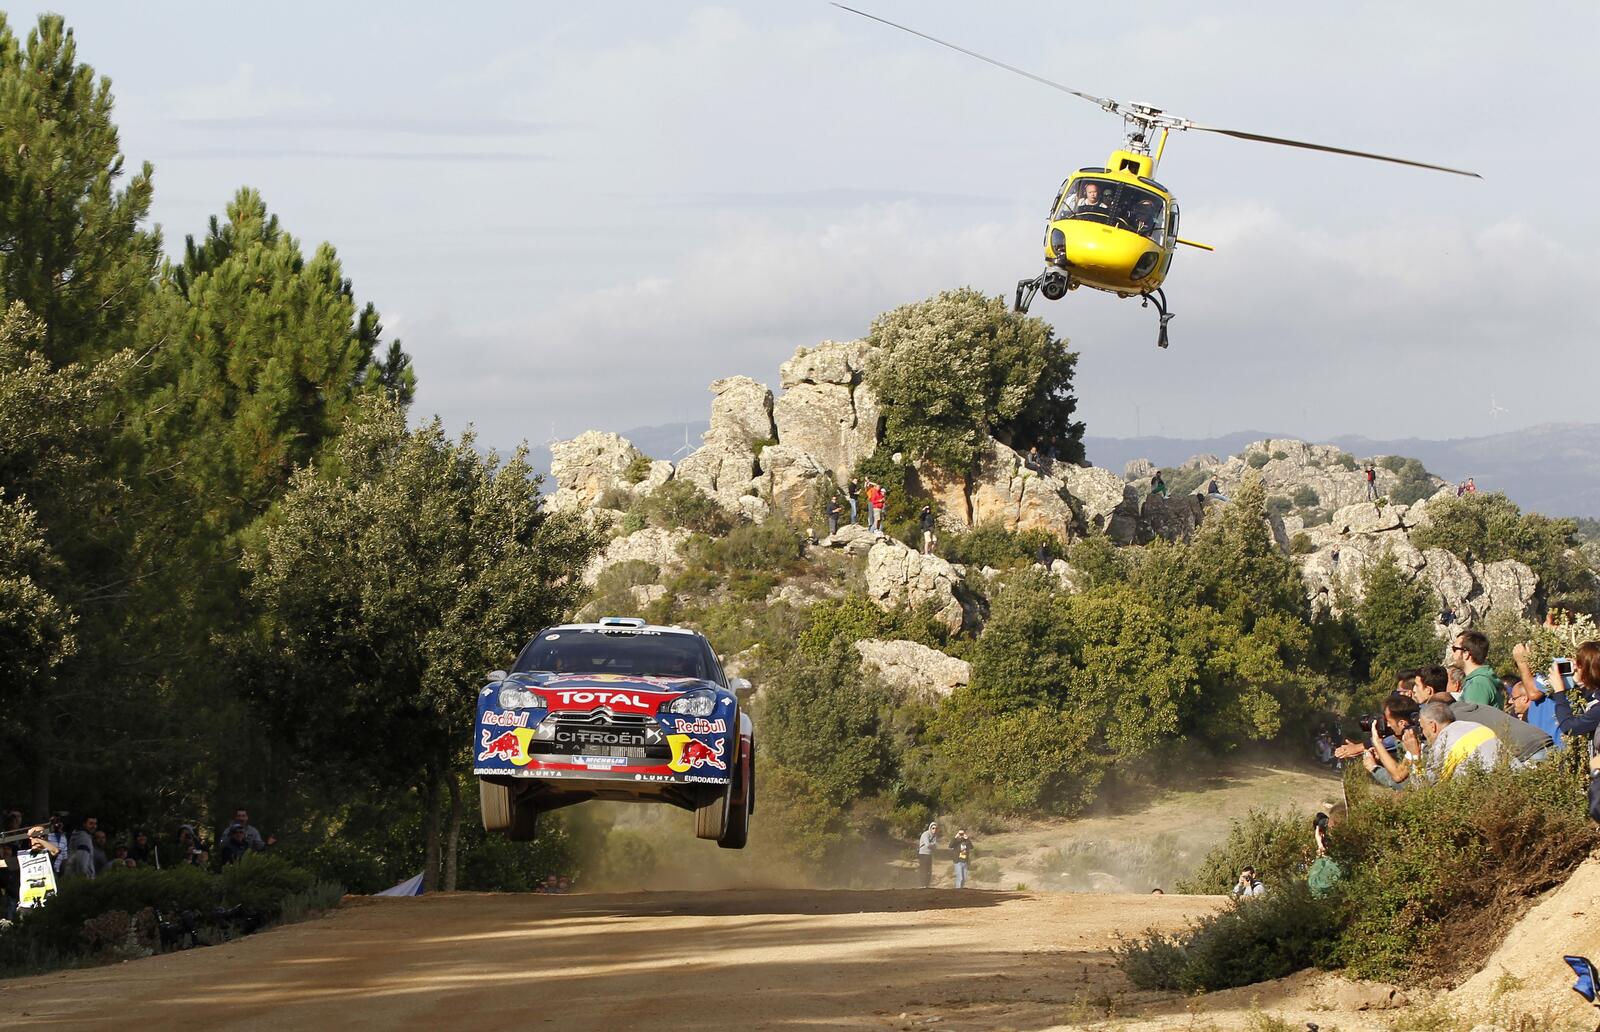 Free photo A helicopter chases a sports car at a rally